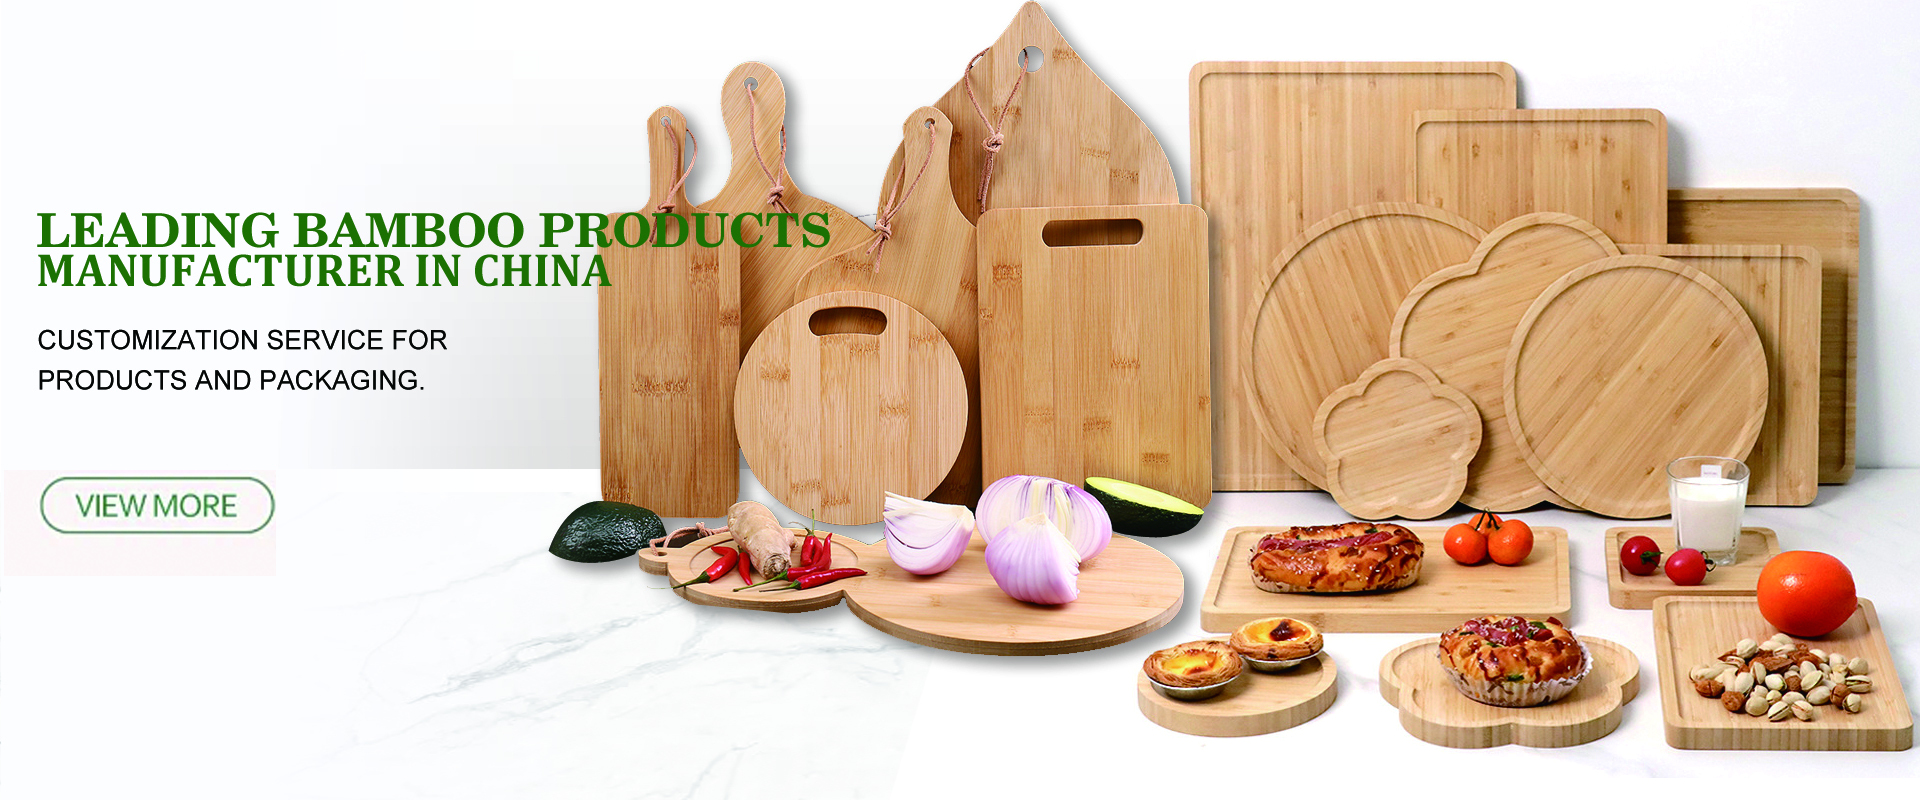 LEADING BAMBOO PRODUCTS MANUFACTURER IN CHINA
